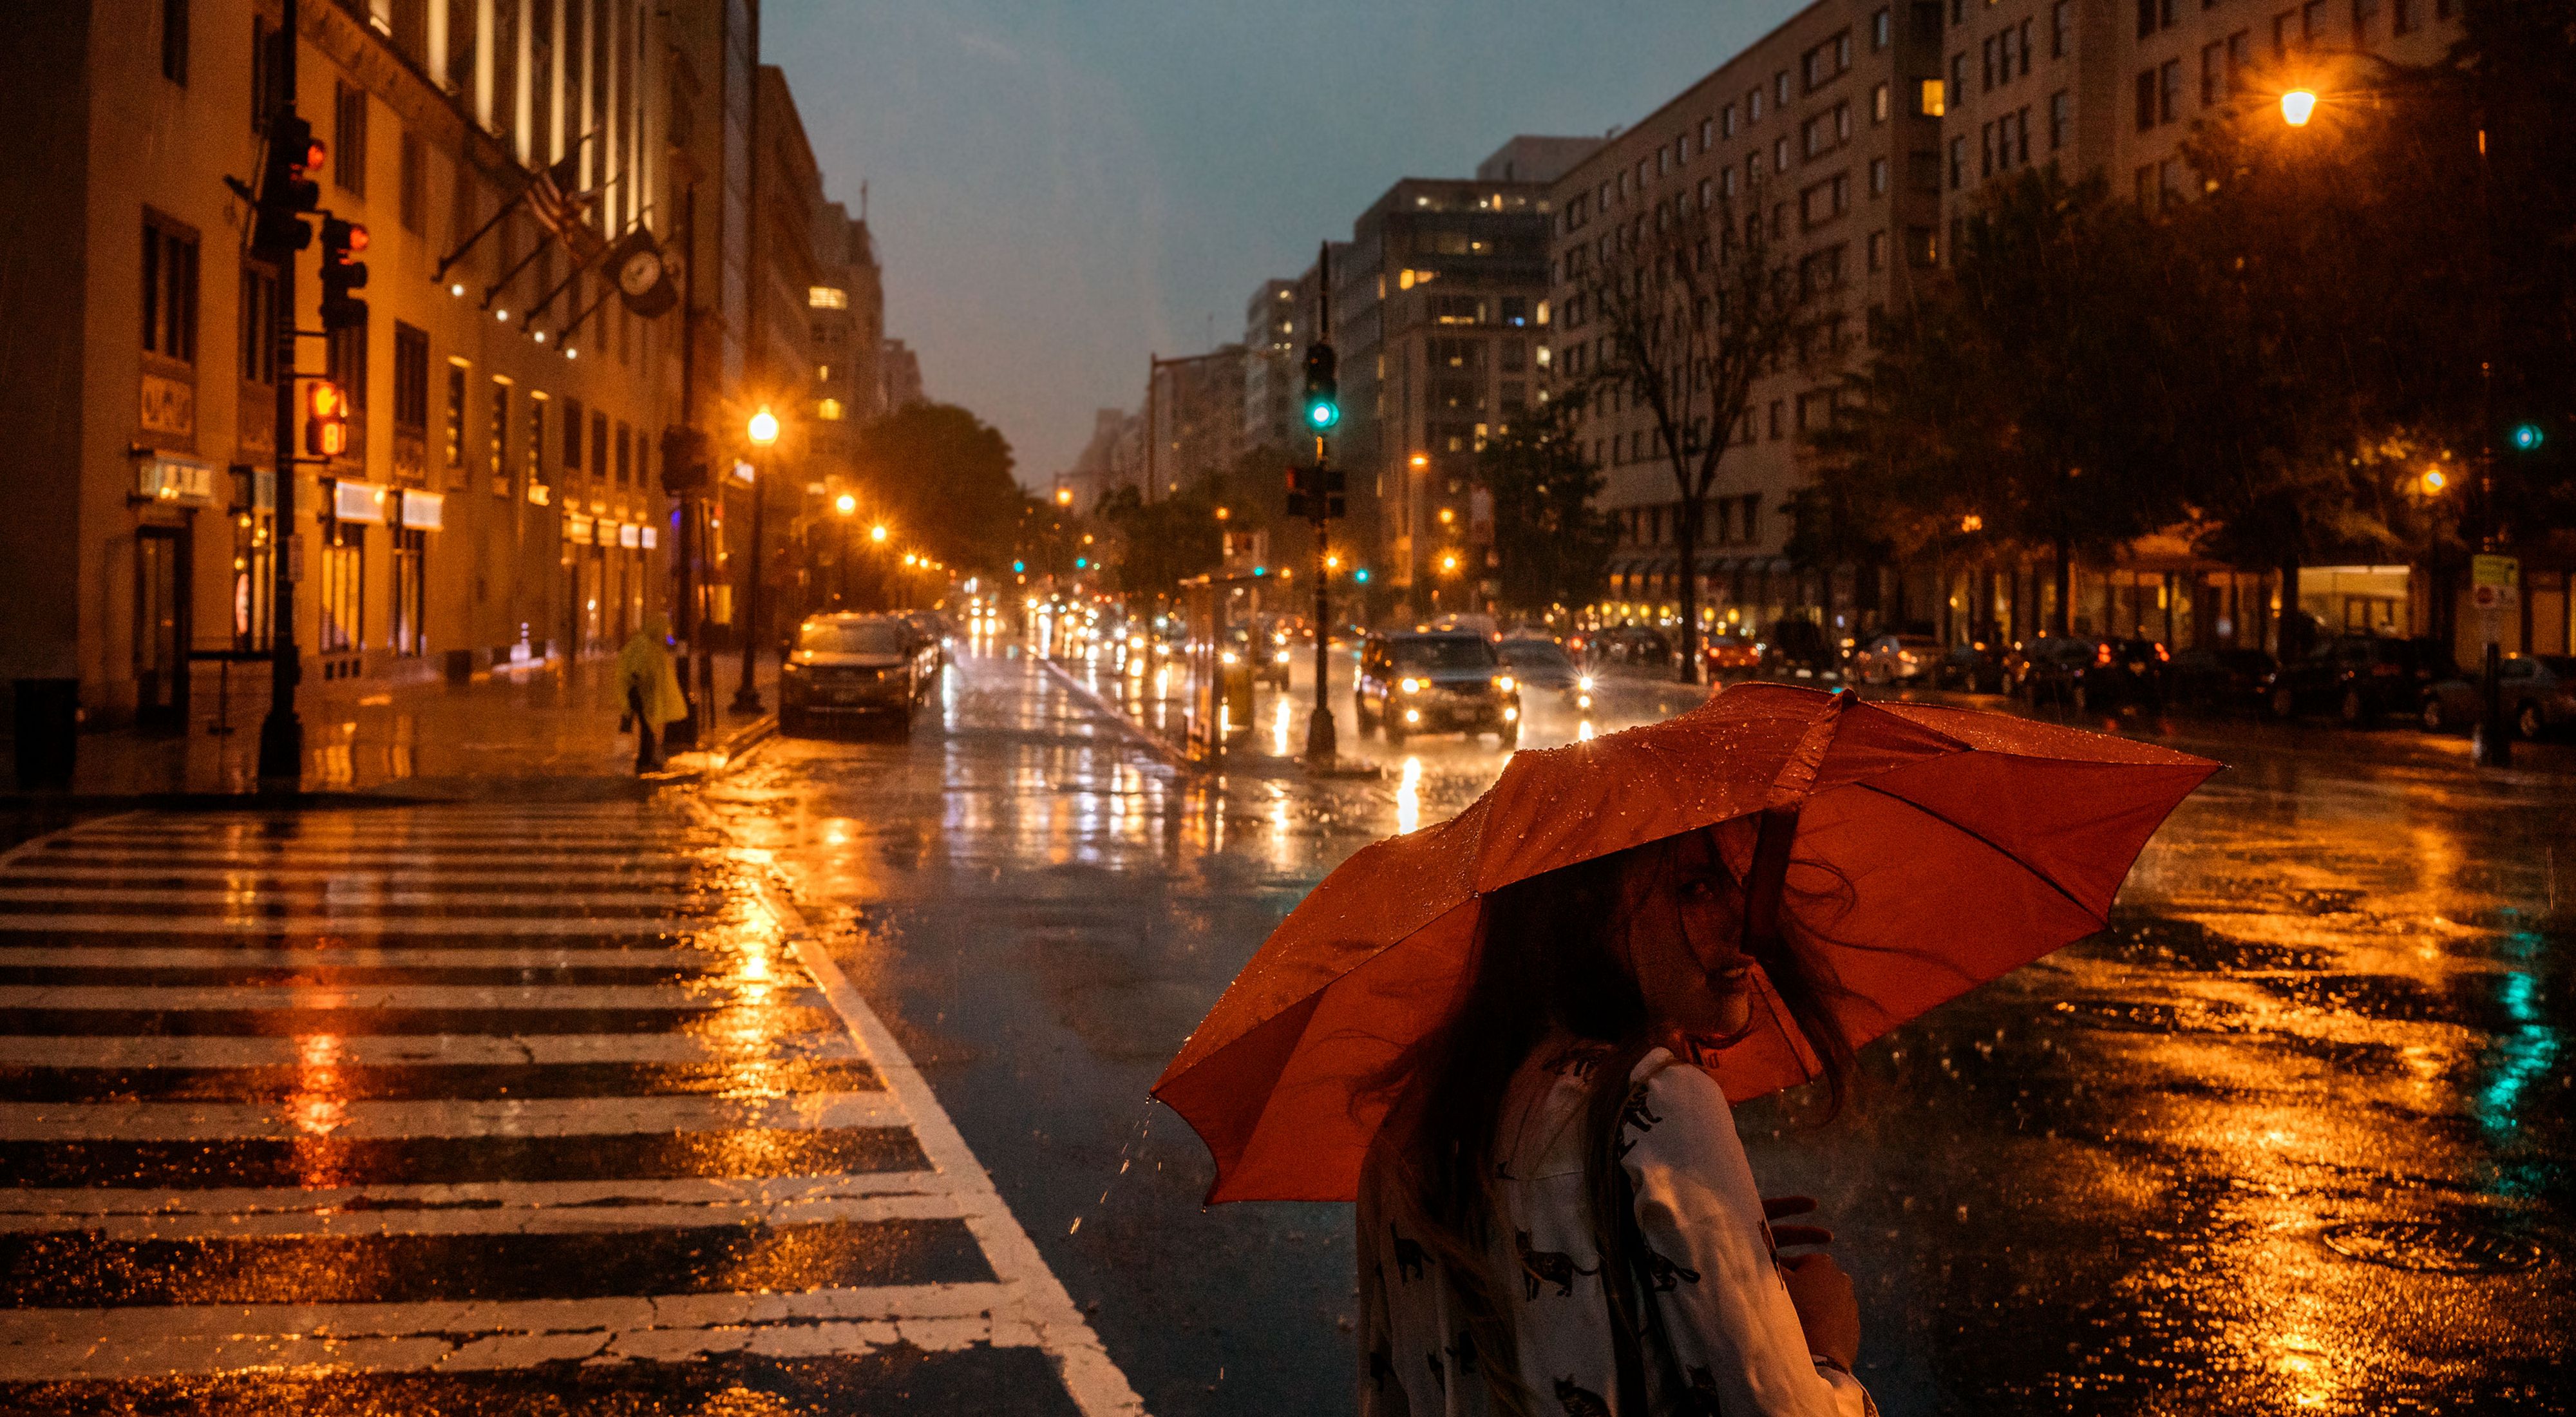 A person with a red umbrella crosses a city street at night.